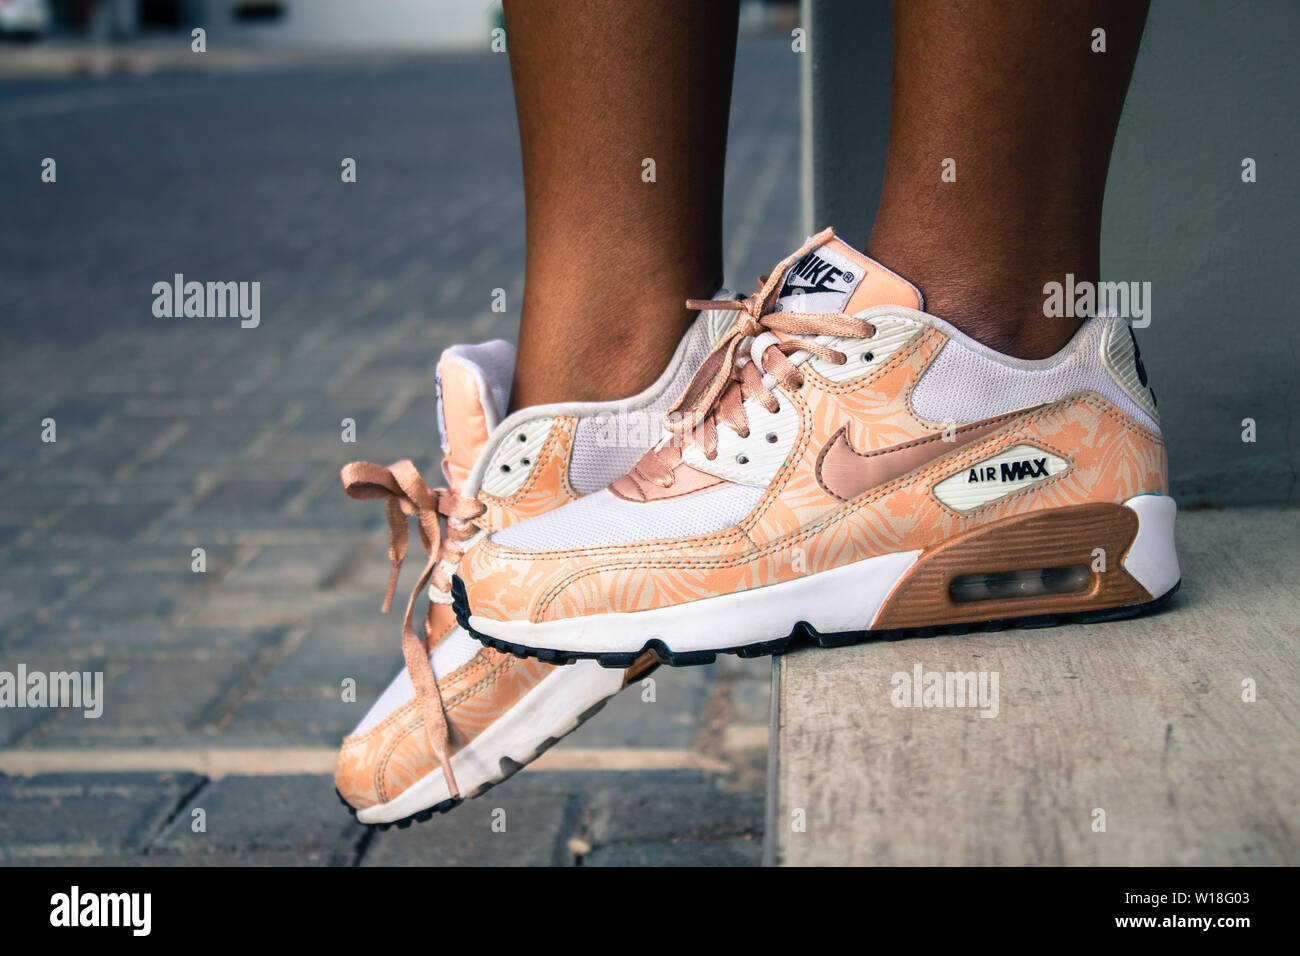 Nike Air Max on Steps Stock Photo